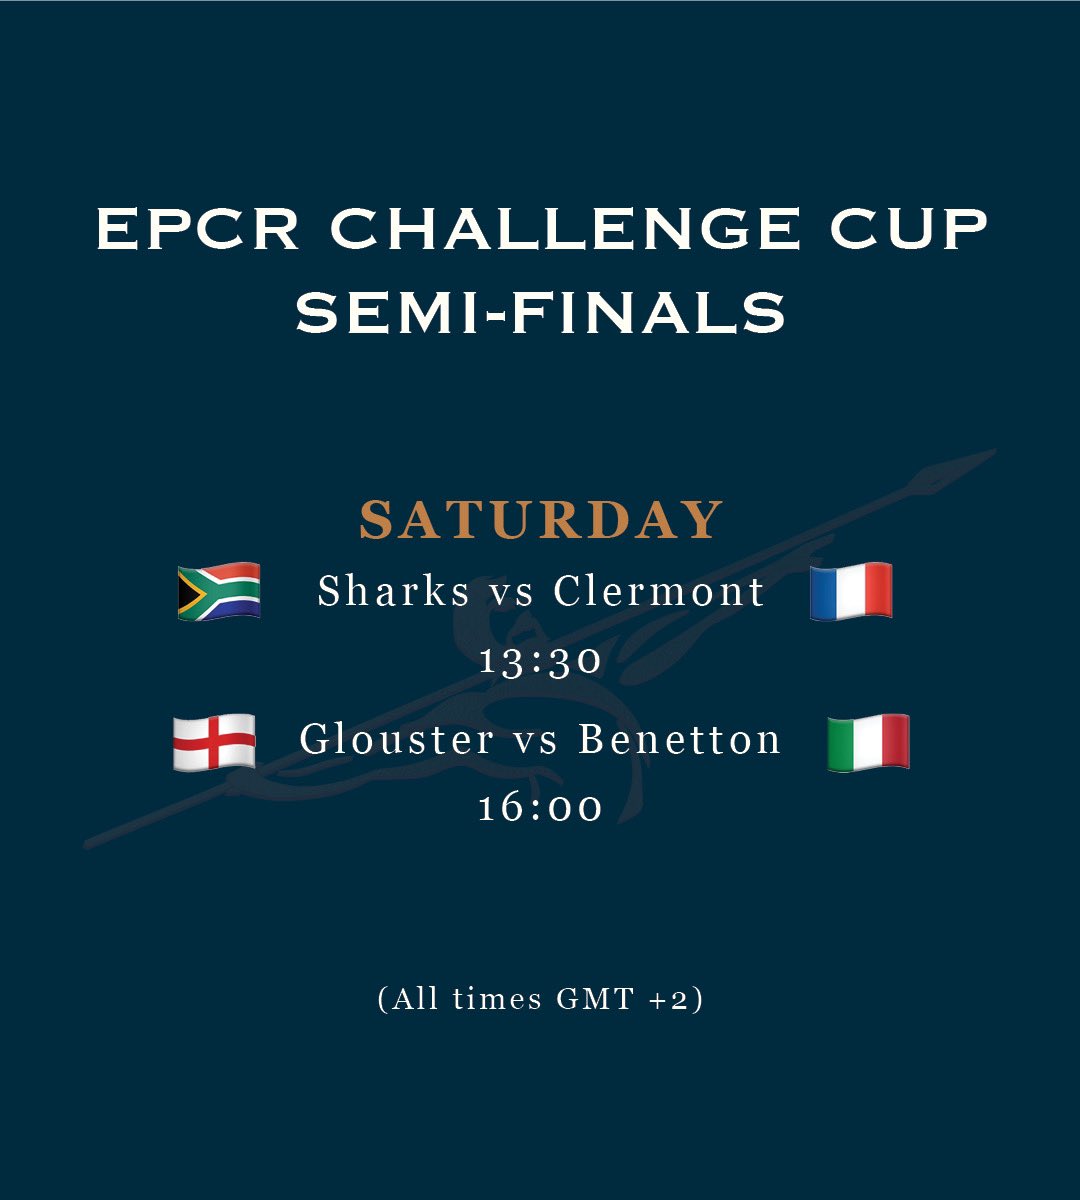 Big weekend for the Sharks with European glory at stake in the EPCR Challenge semi vs Clermont.
Wishing all the best to Avante co-founders Lukhanyo Am & Makazole Mapimpi as their team runs out for this one!
#AvanteBrandy #MVPVSOP #JoinOurTeam #SouthAfricanBrandy #AvanteGuarde